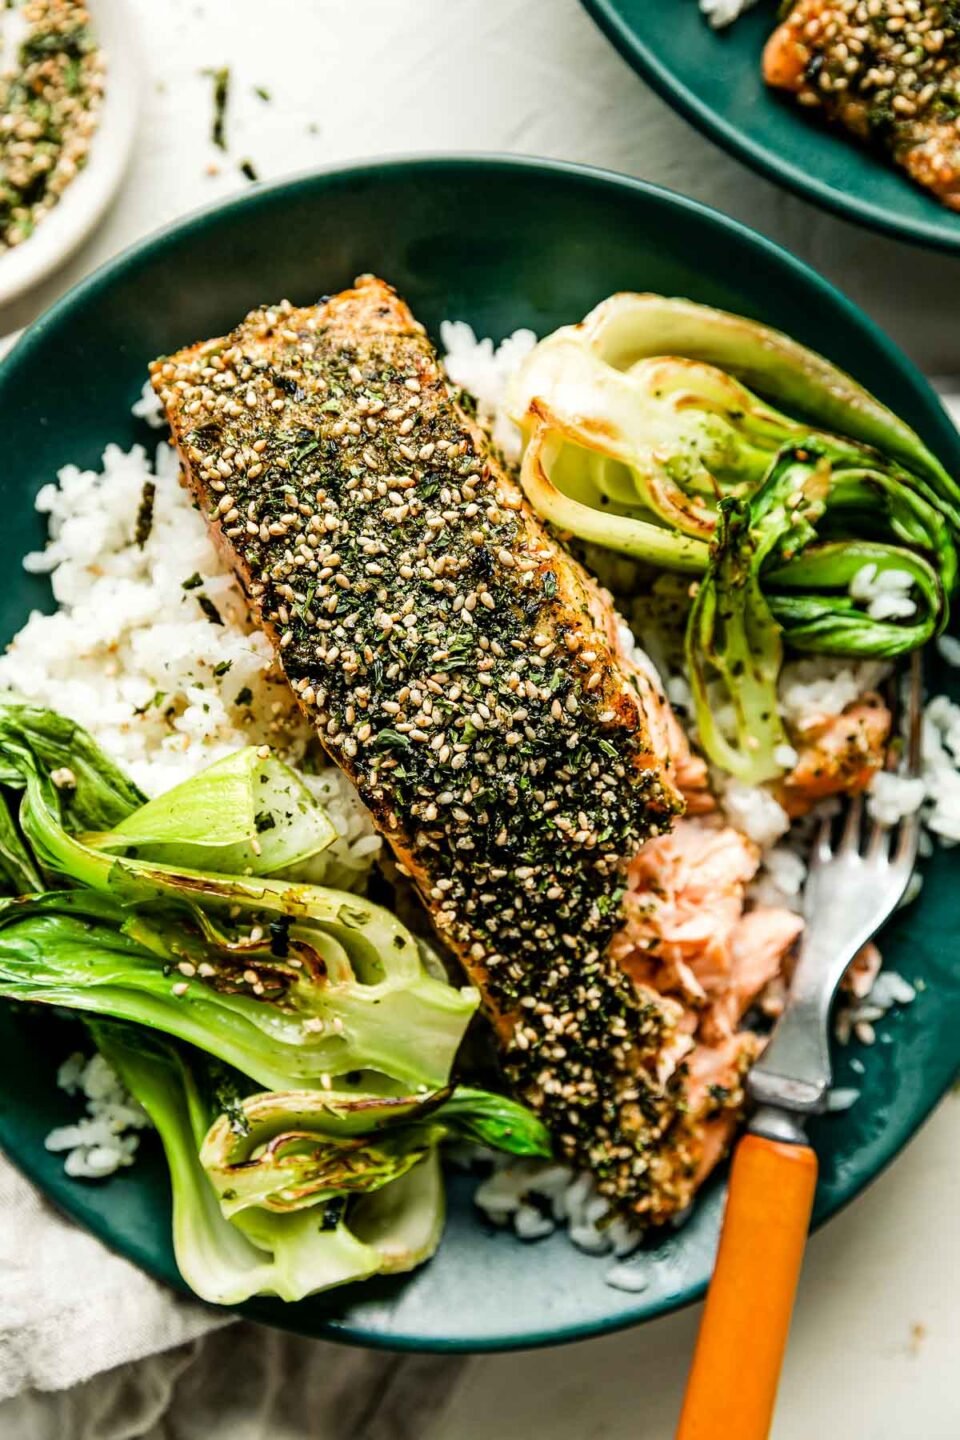 A green shallow bowl with cooked white rice, furikake salmon and bok choy sits on a dishtowel on a white surface alongside a wood-handled fork, dish of furikake seasoning and another prepared bowl.